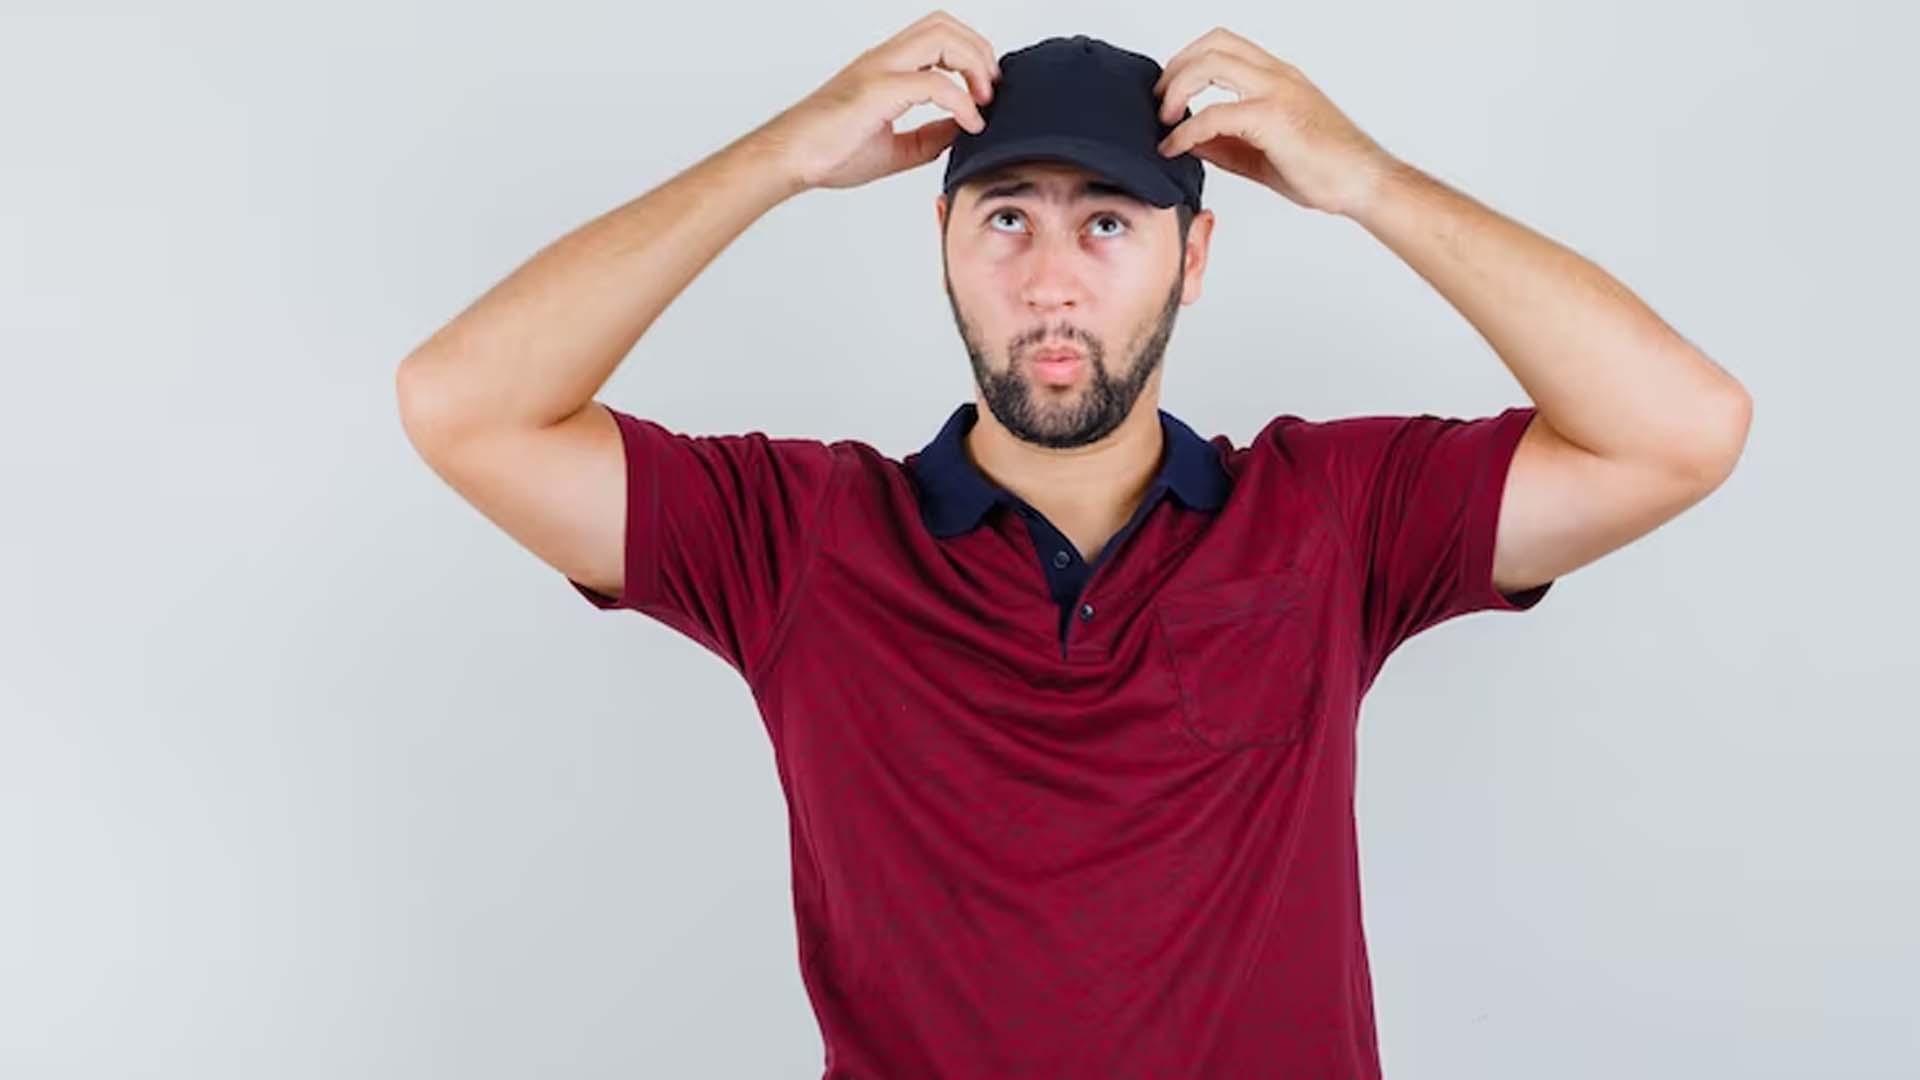 Does Wearing a Cap Cause Hair Loss?